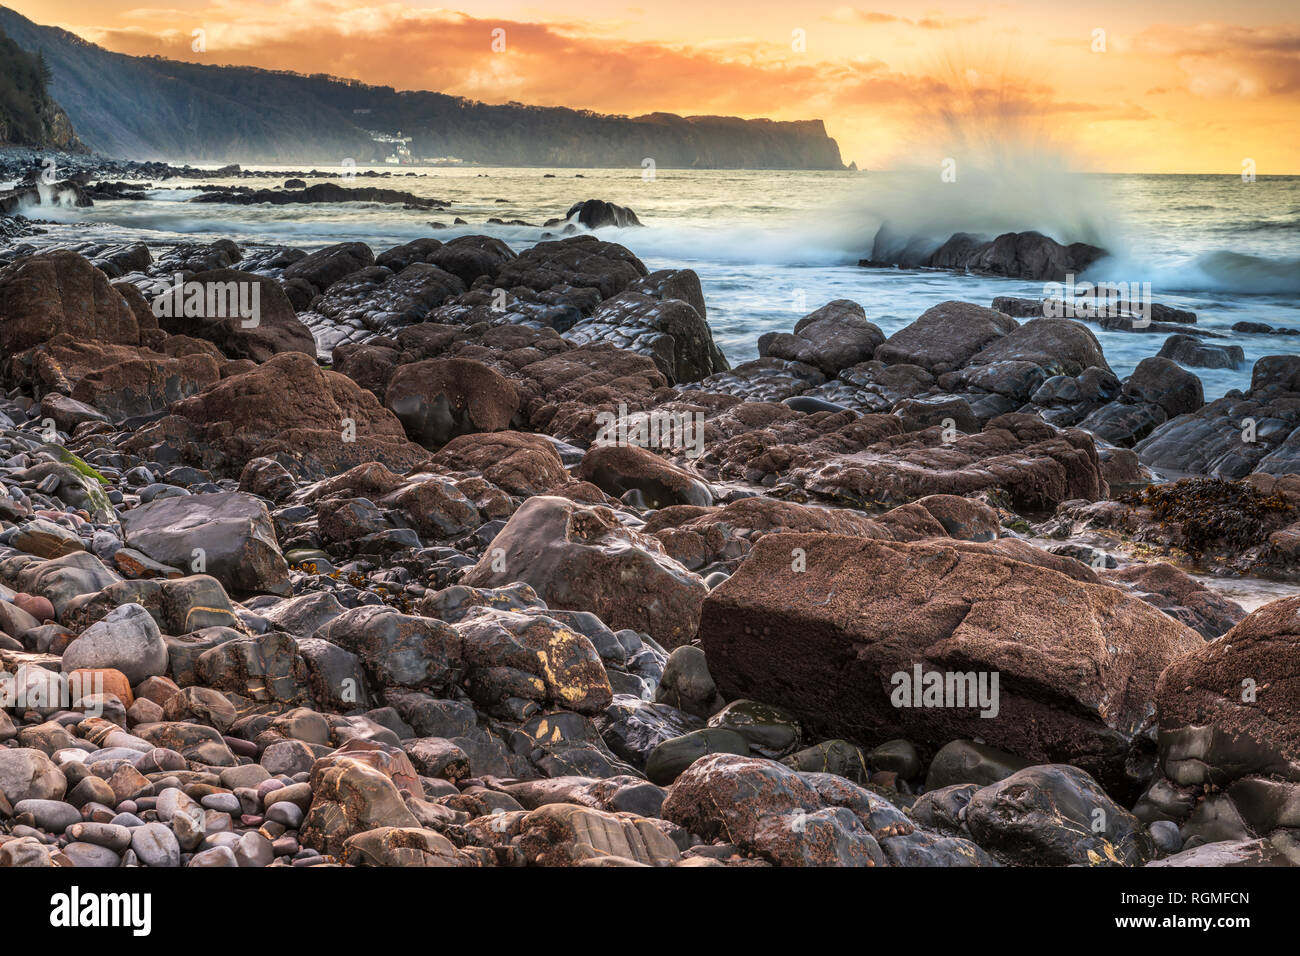 Bucks Mills, Devon, UK. 30th January 2019. After a cold overcast day in North Devon, the clouds finally part as the sun starts to set over the rocky shoreline at Bucks Mills. The seaspray from the incoming tide partially hides the distant white fishing village of Clovelly and Blackchurch Rock on the Hartland Peninsula. Credit: Terry Mathews/Alamy Live News Stock Photo